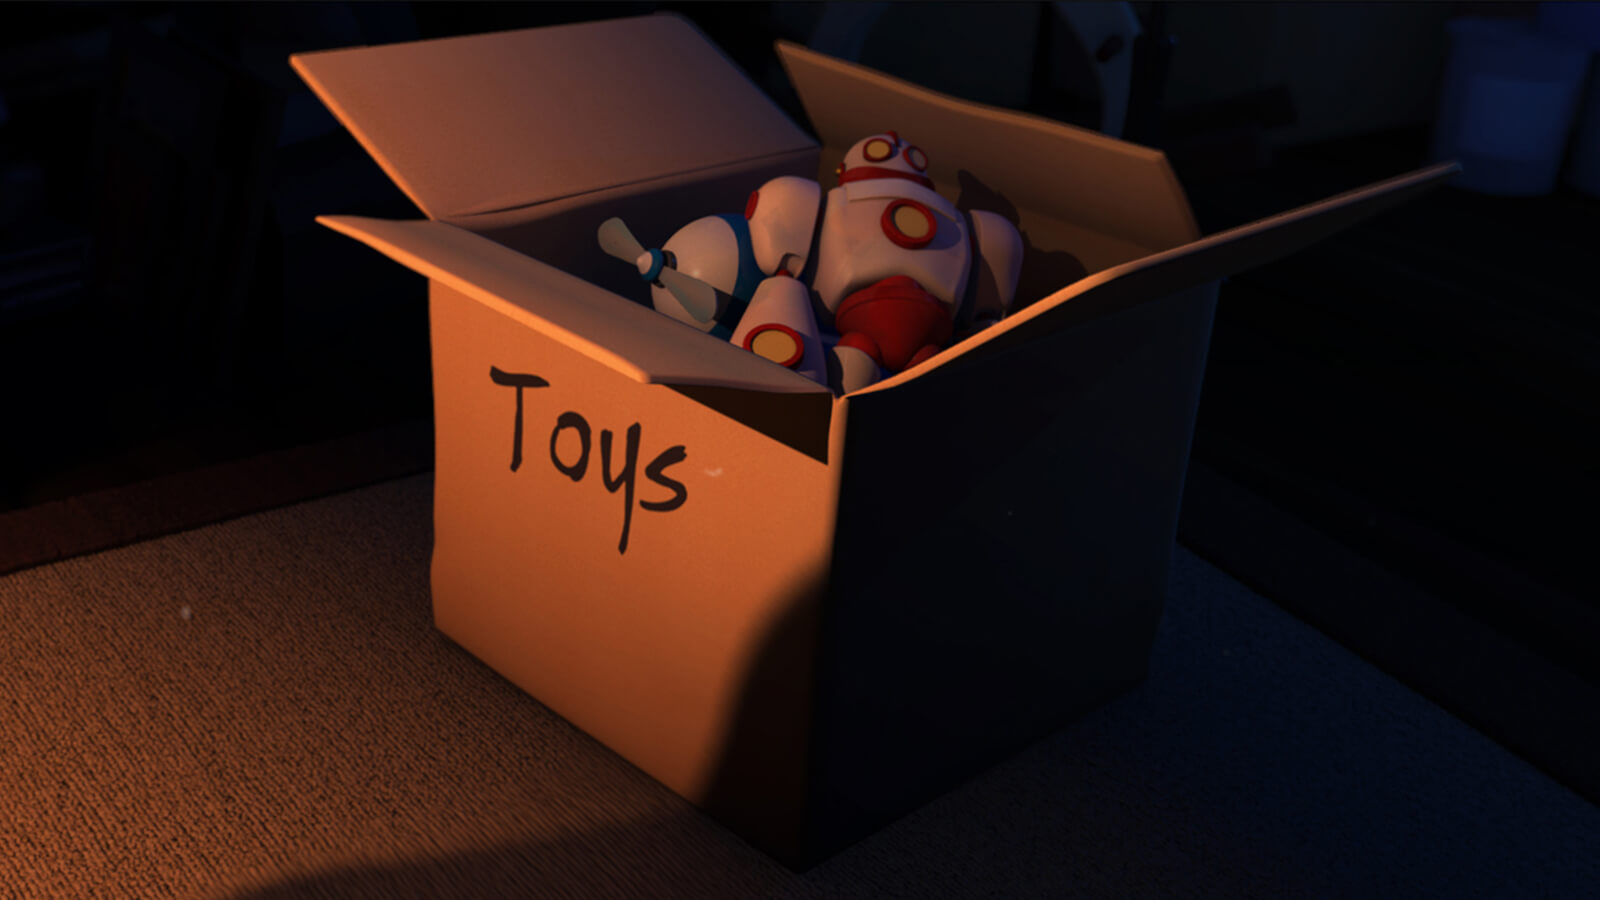 A cardboard box in a dark area lit from one side. It contains plastic toys and is labeled "Toys"